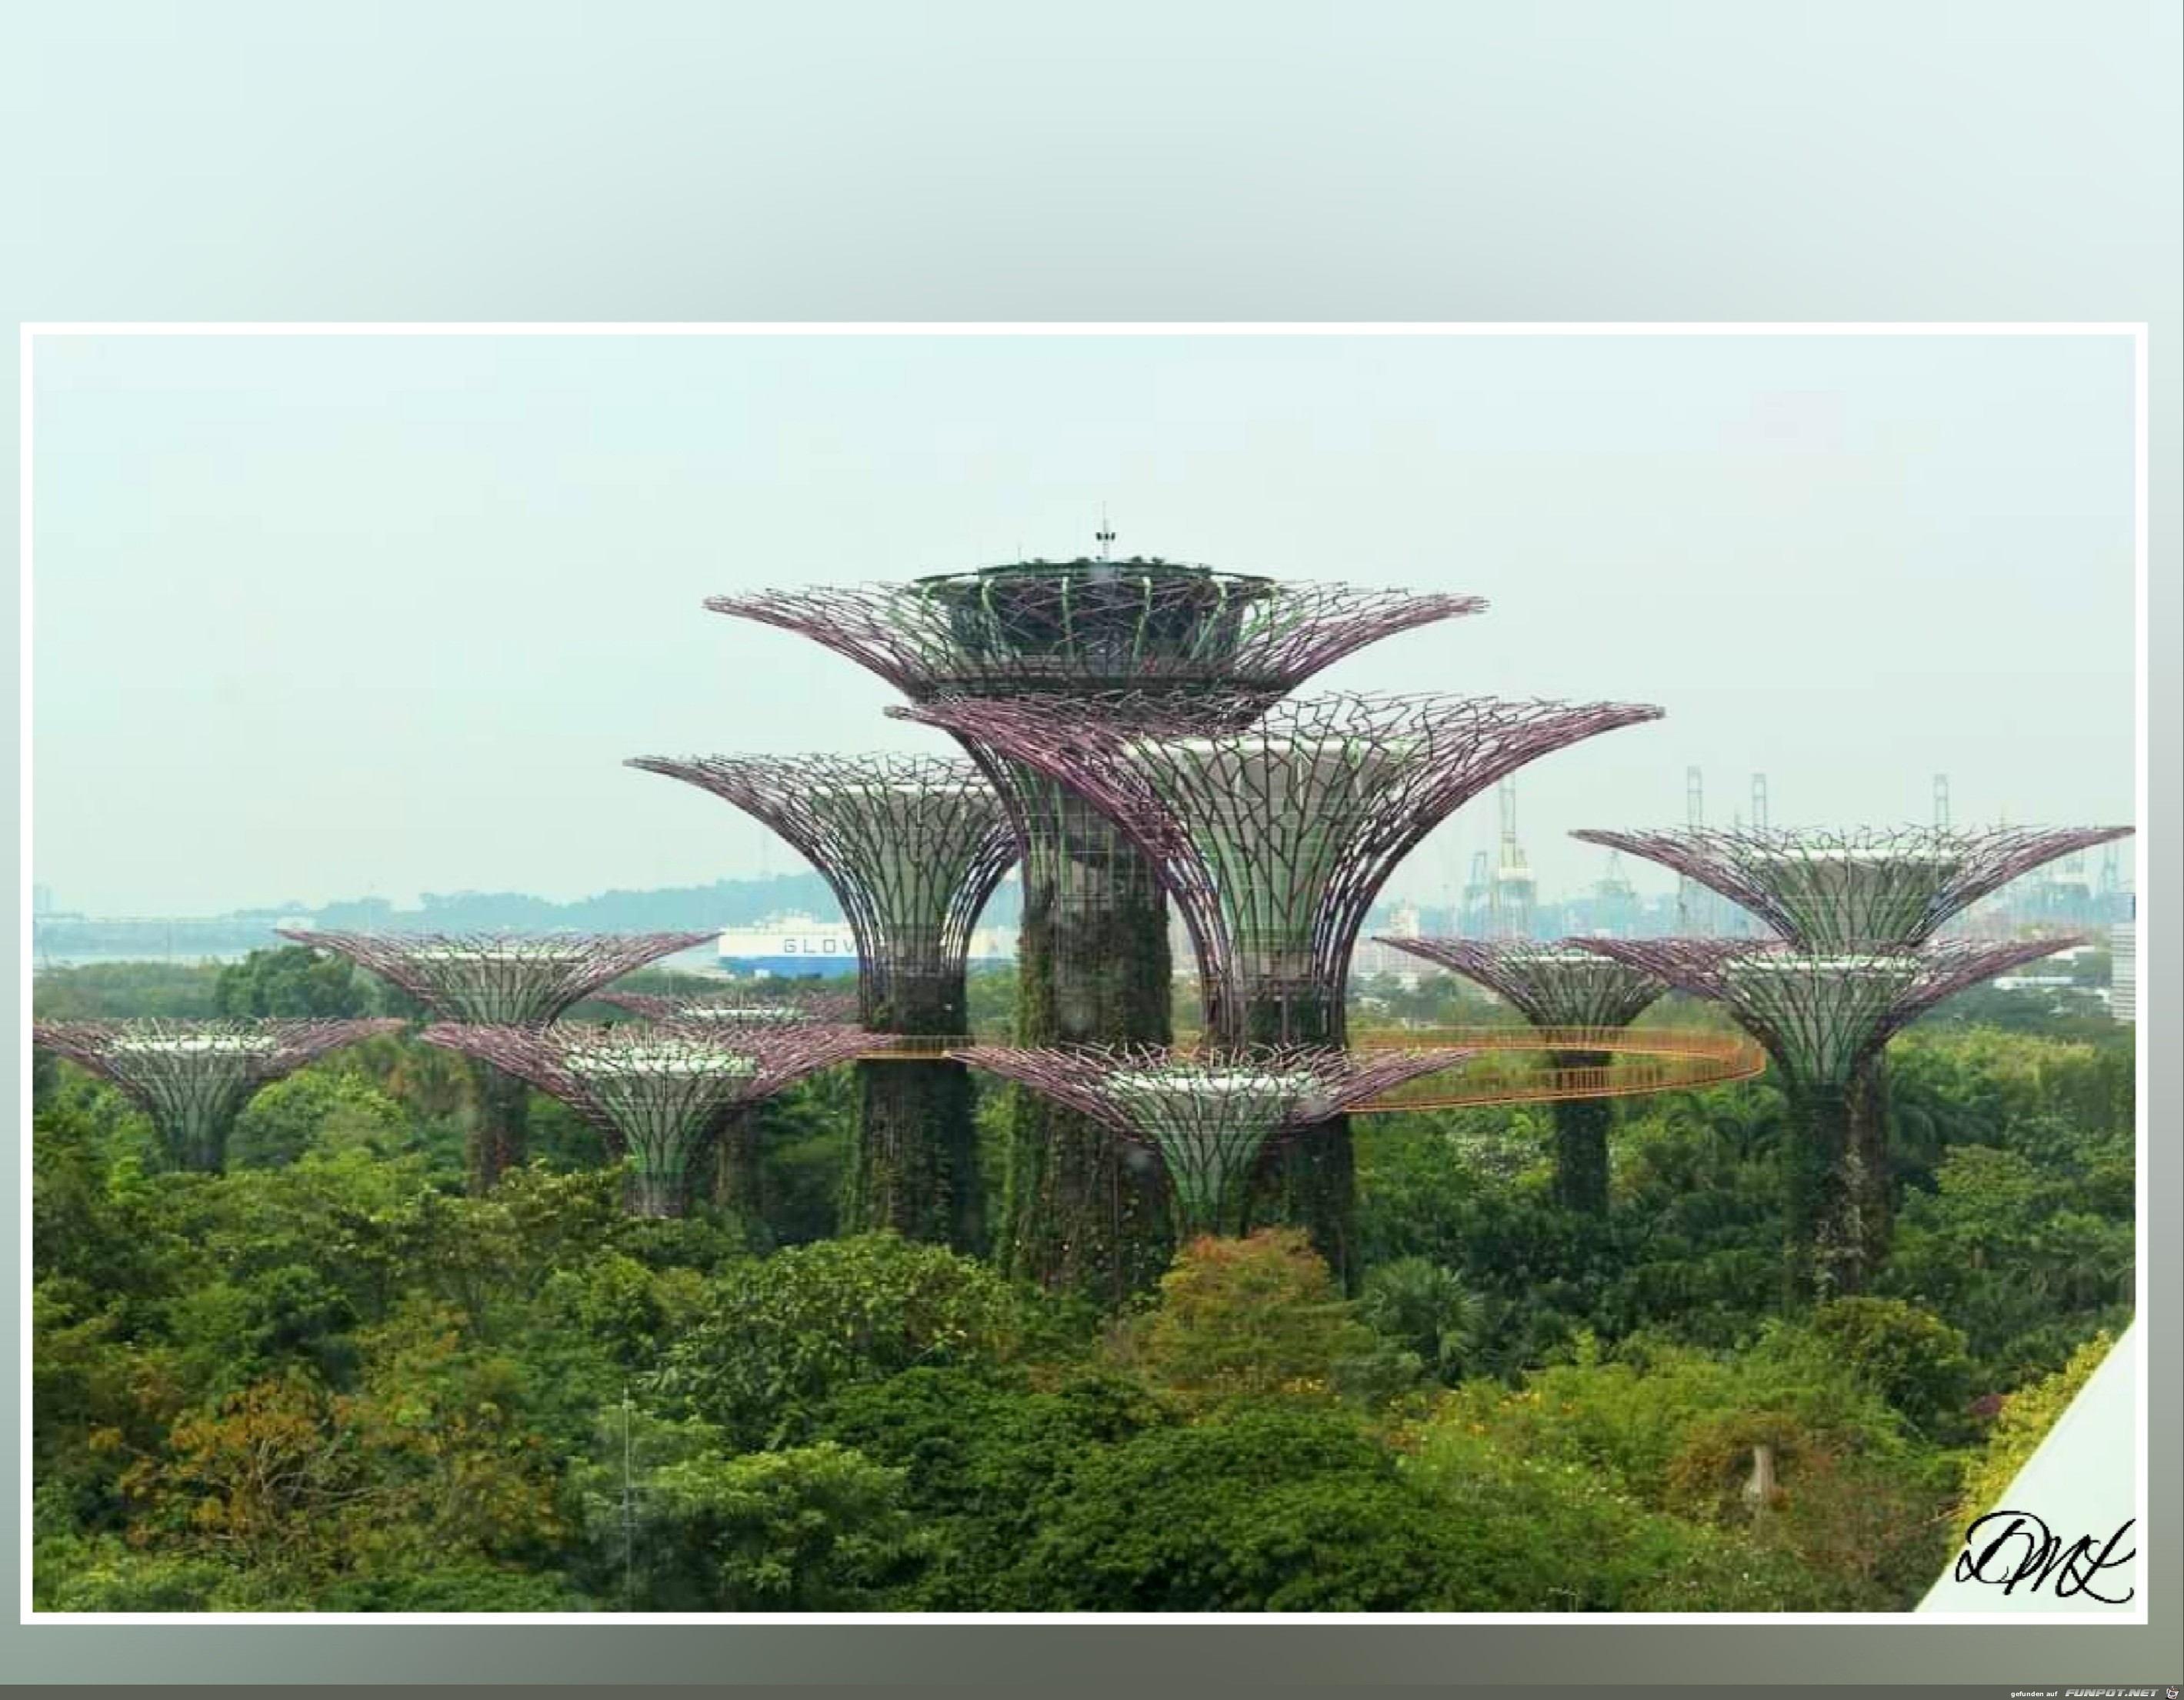 Singapur Garden by the bay Supertrees